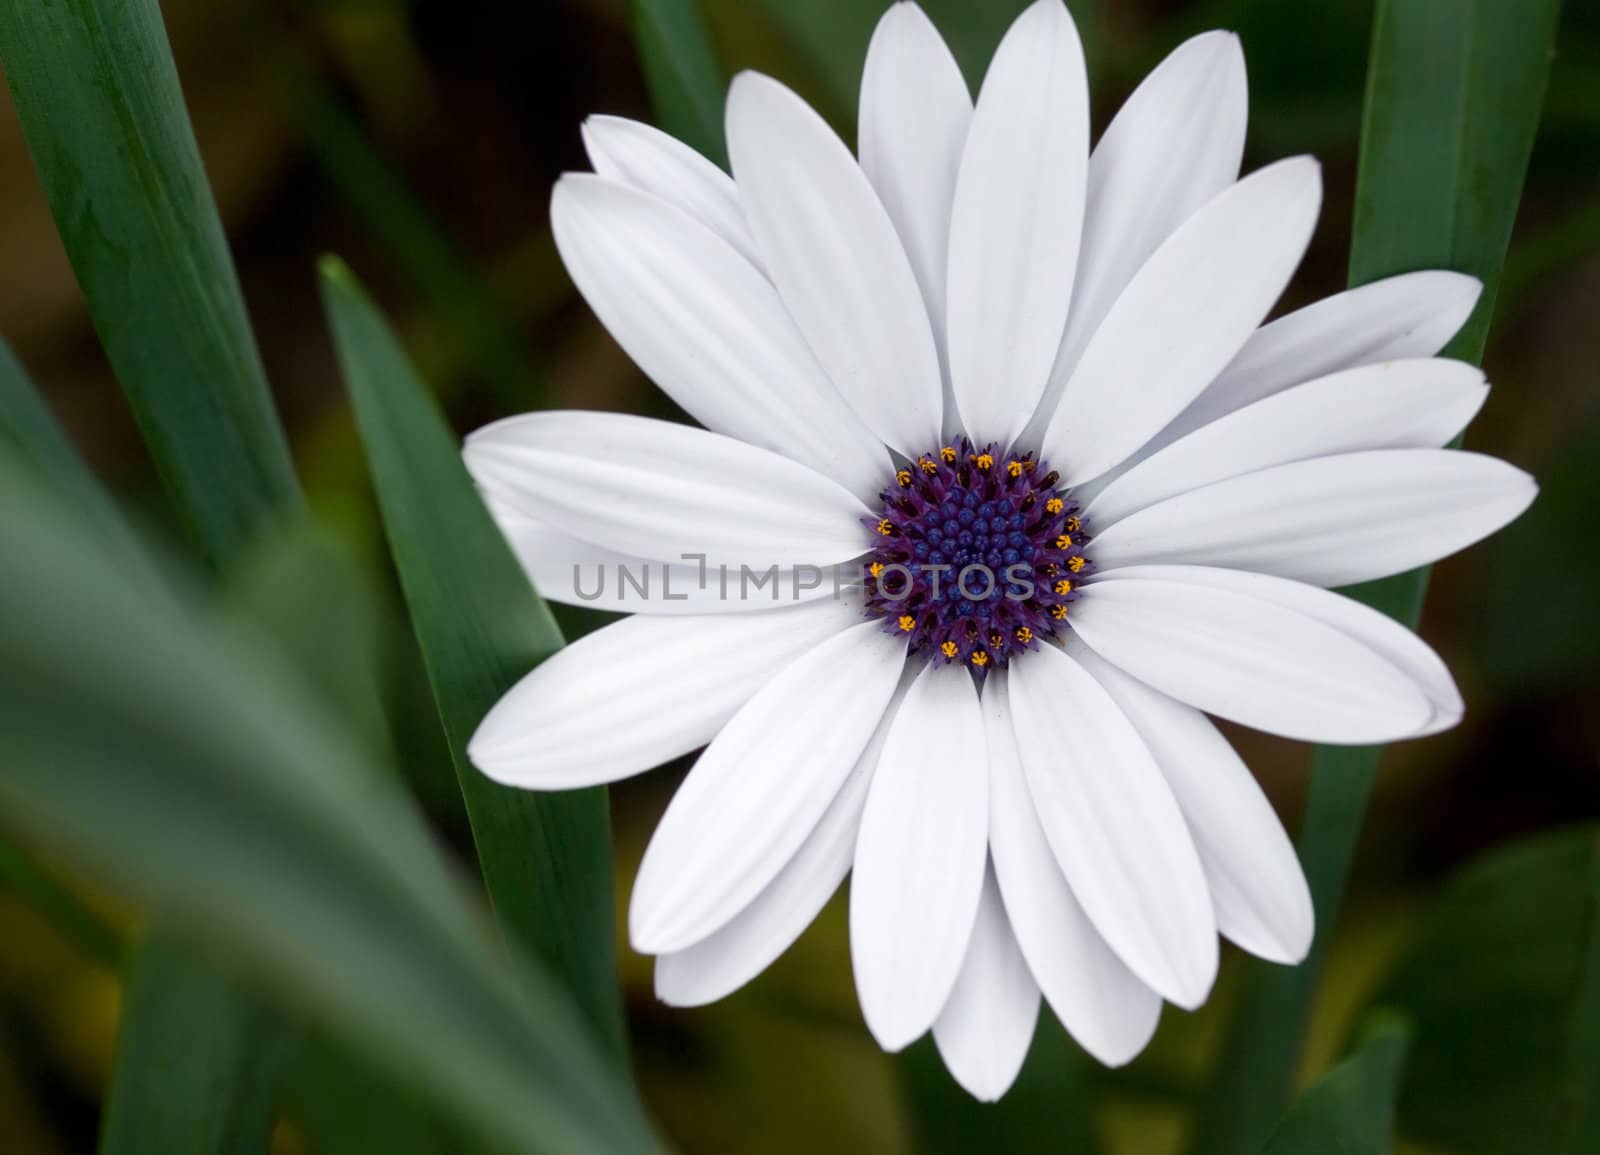 excellent image of a beautiful white daisy flower